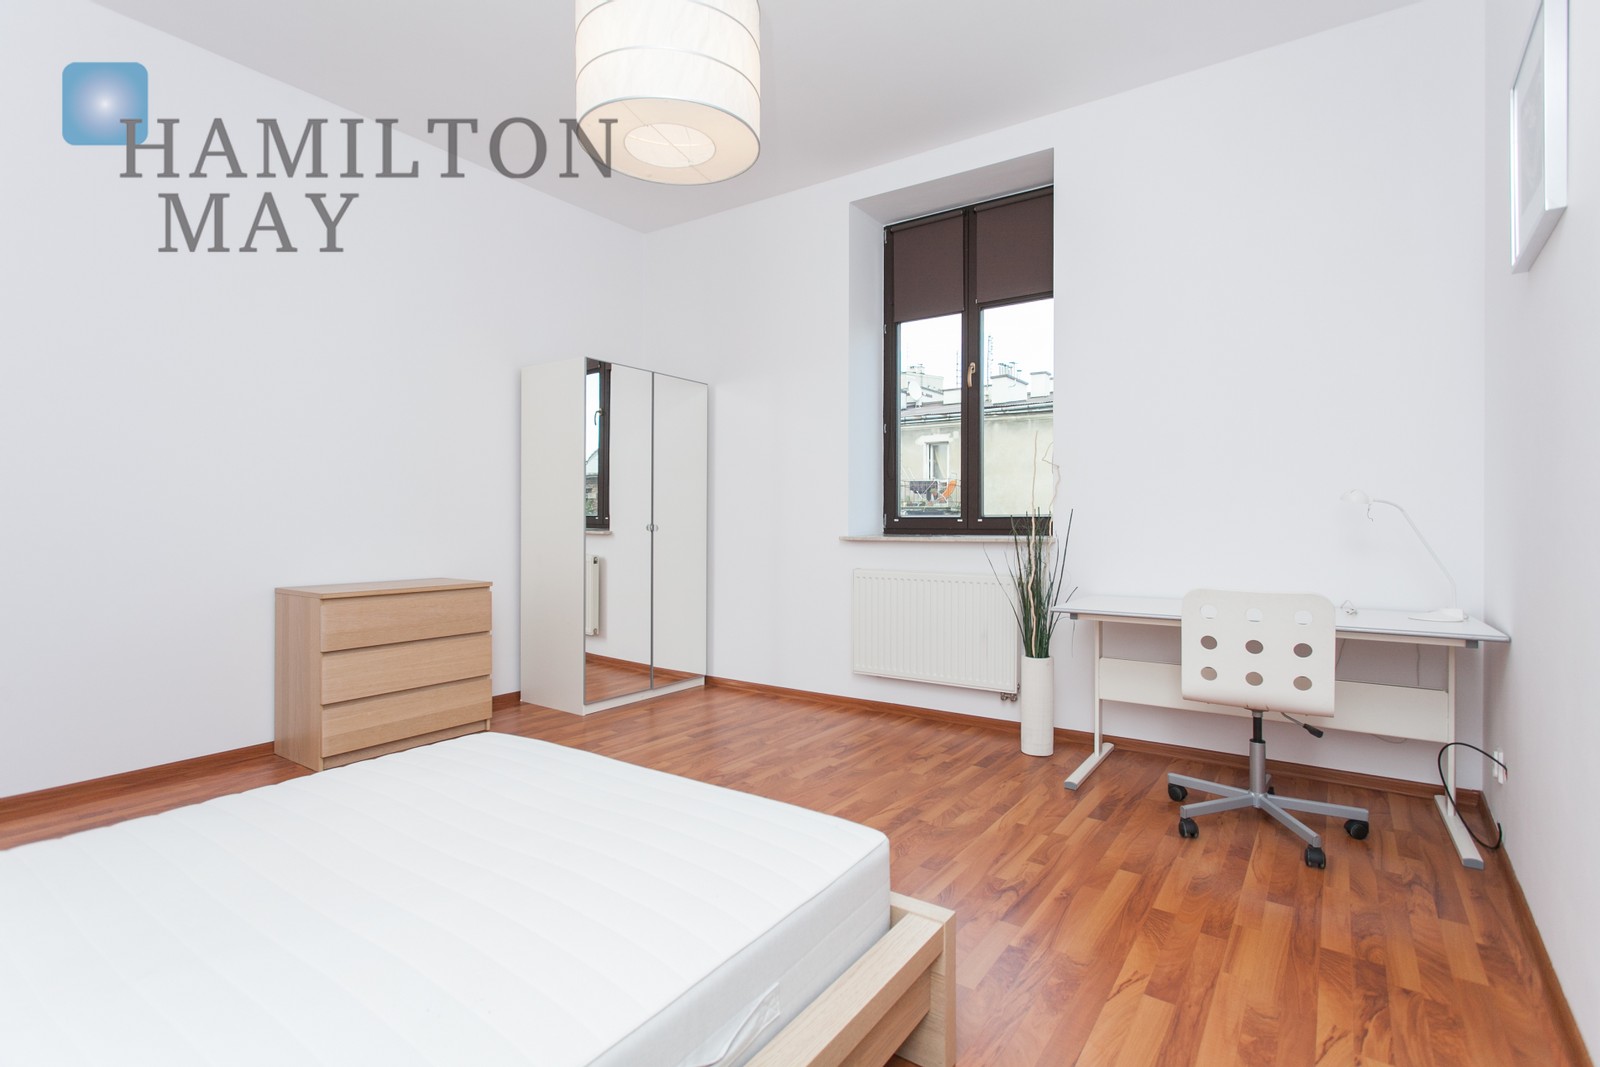 For sale, a spacious 2 bedroom apartment located in Stare Podgórze - ul. Lwowska Krakow for sale